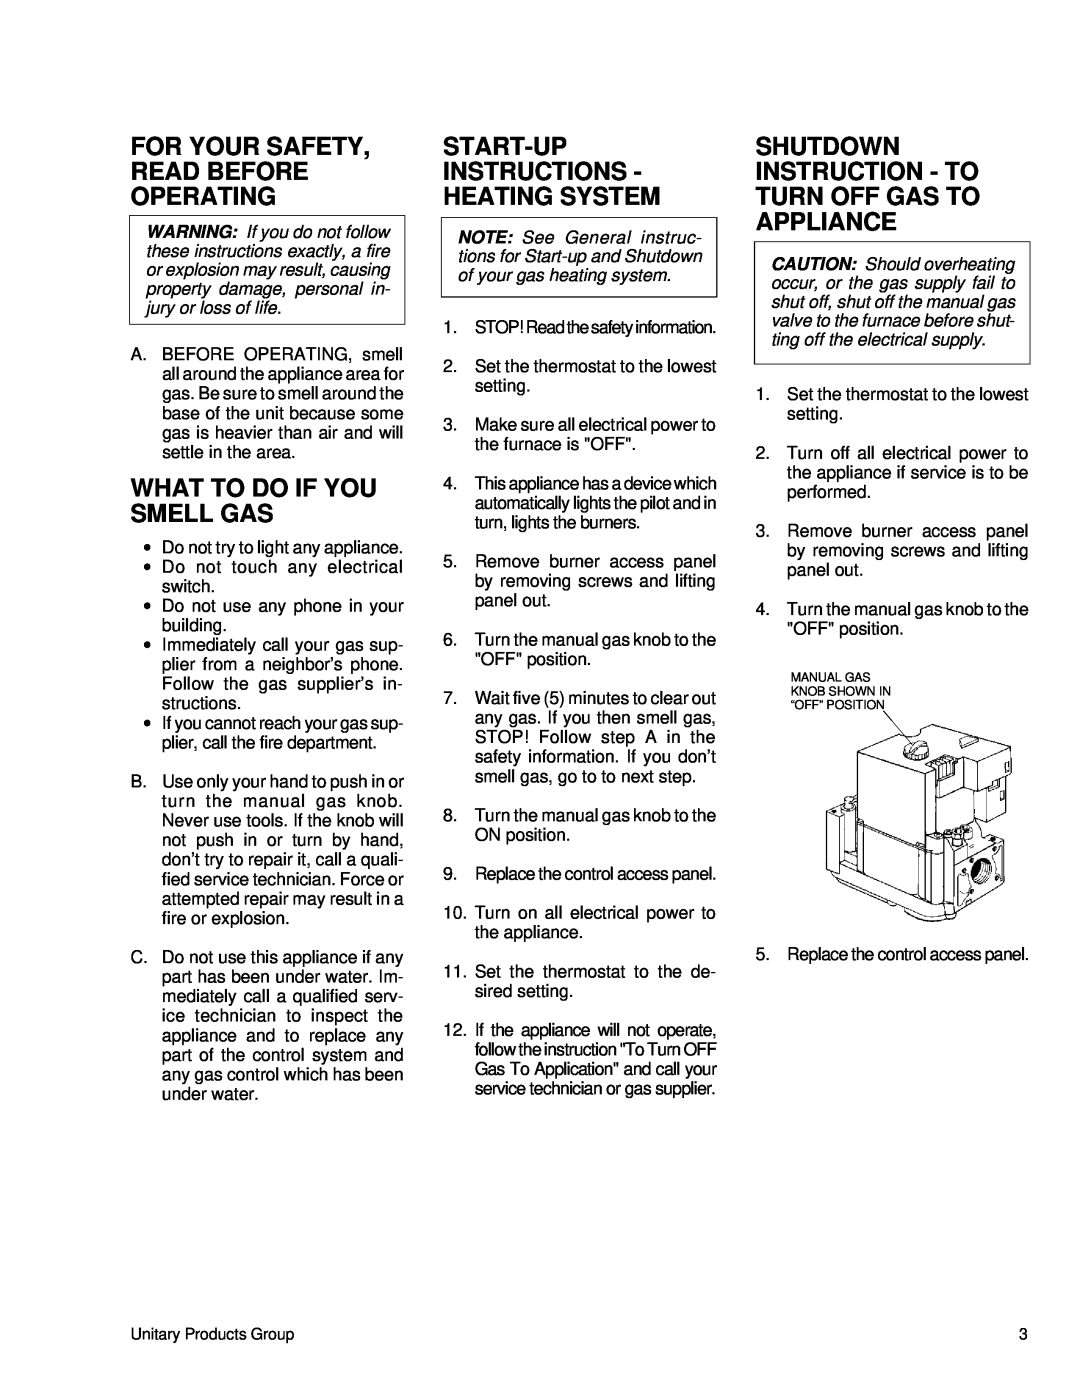 York Heating & AIR CONDITIONER manual For Your Safety, Read Before Operating, What To Do If You Smell Gas 